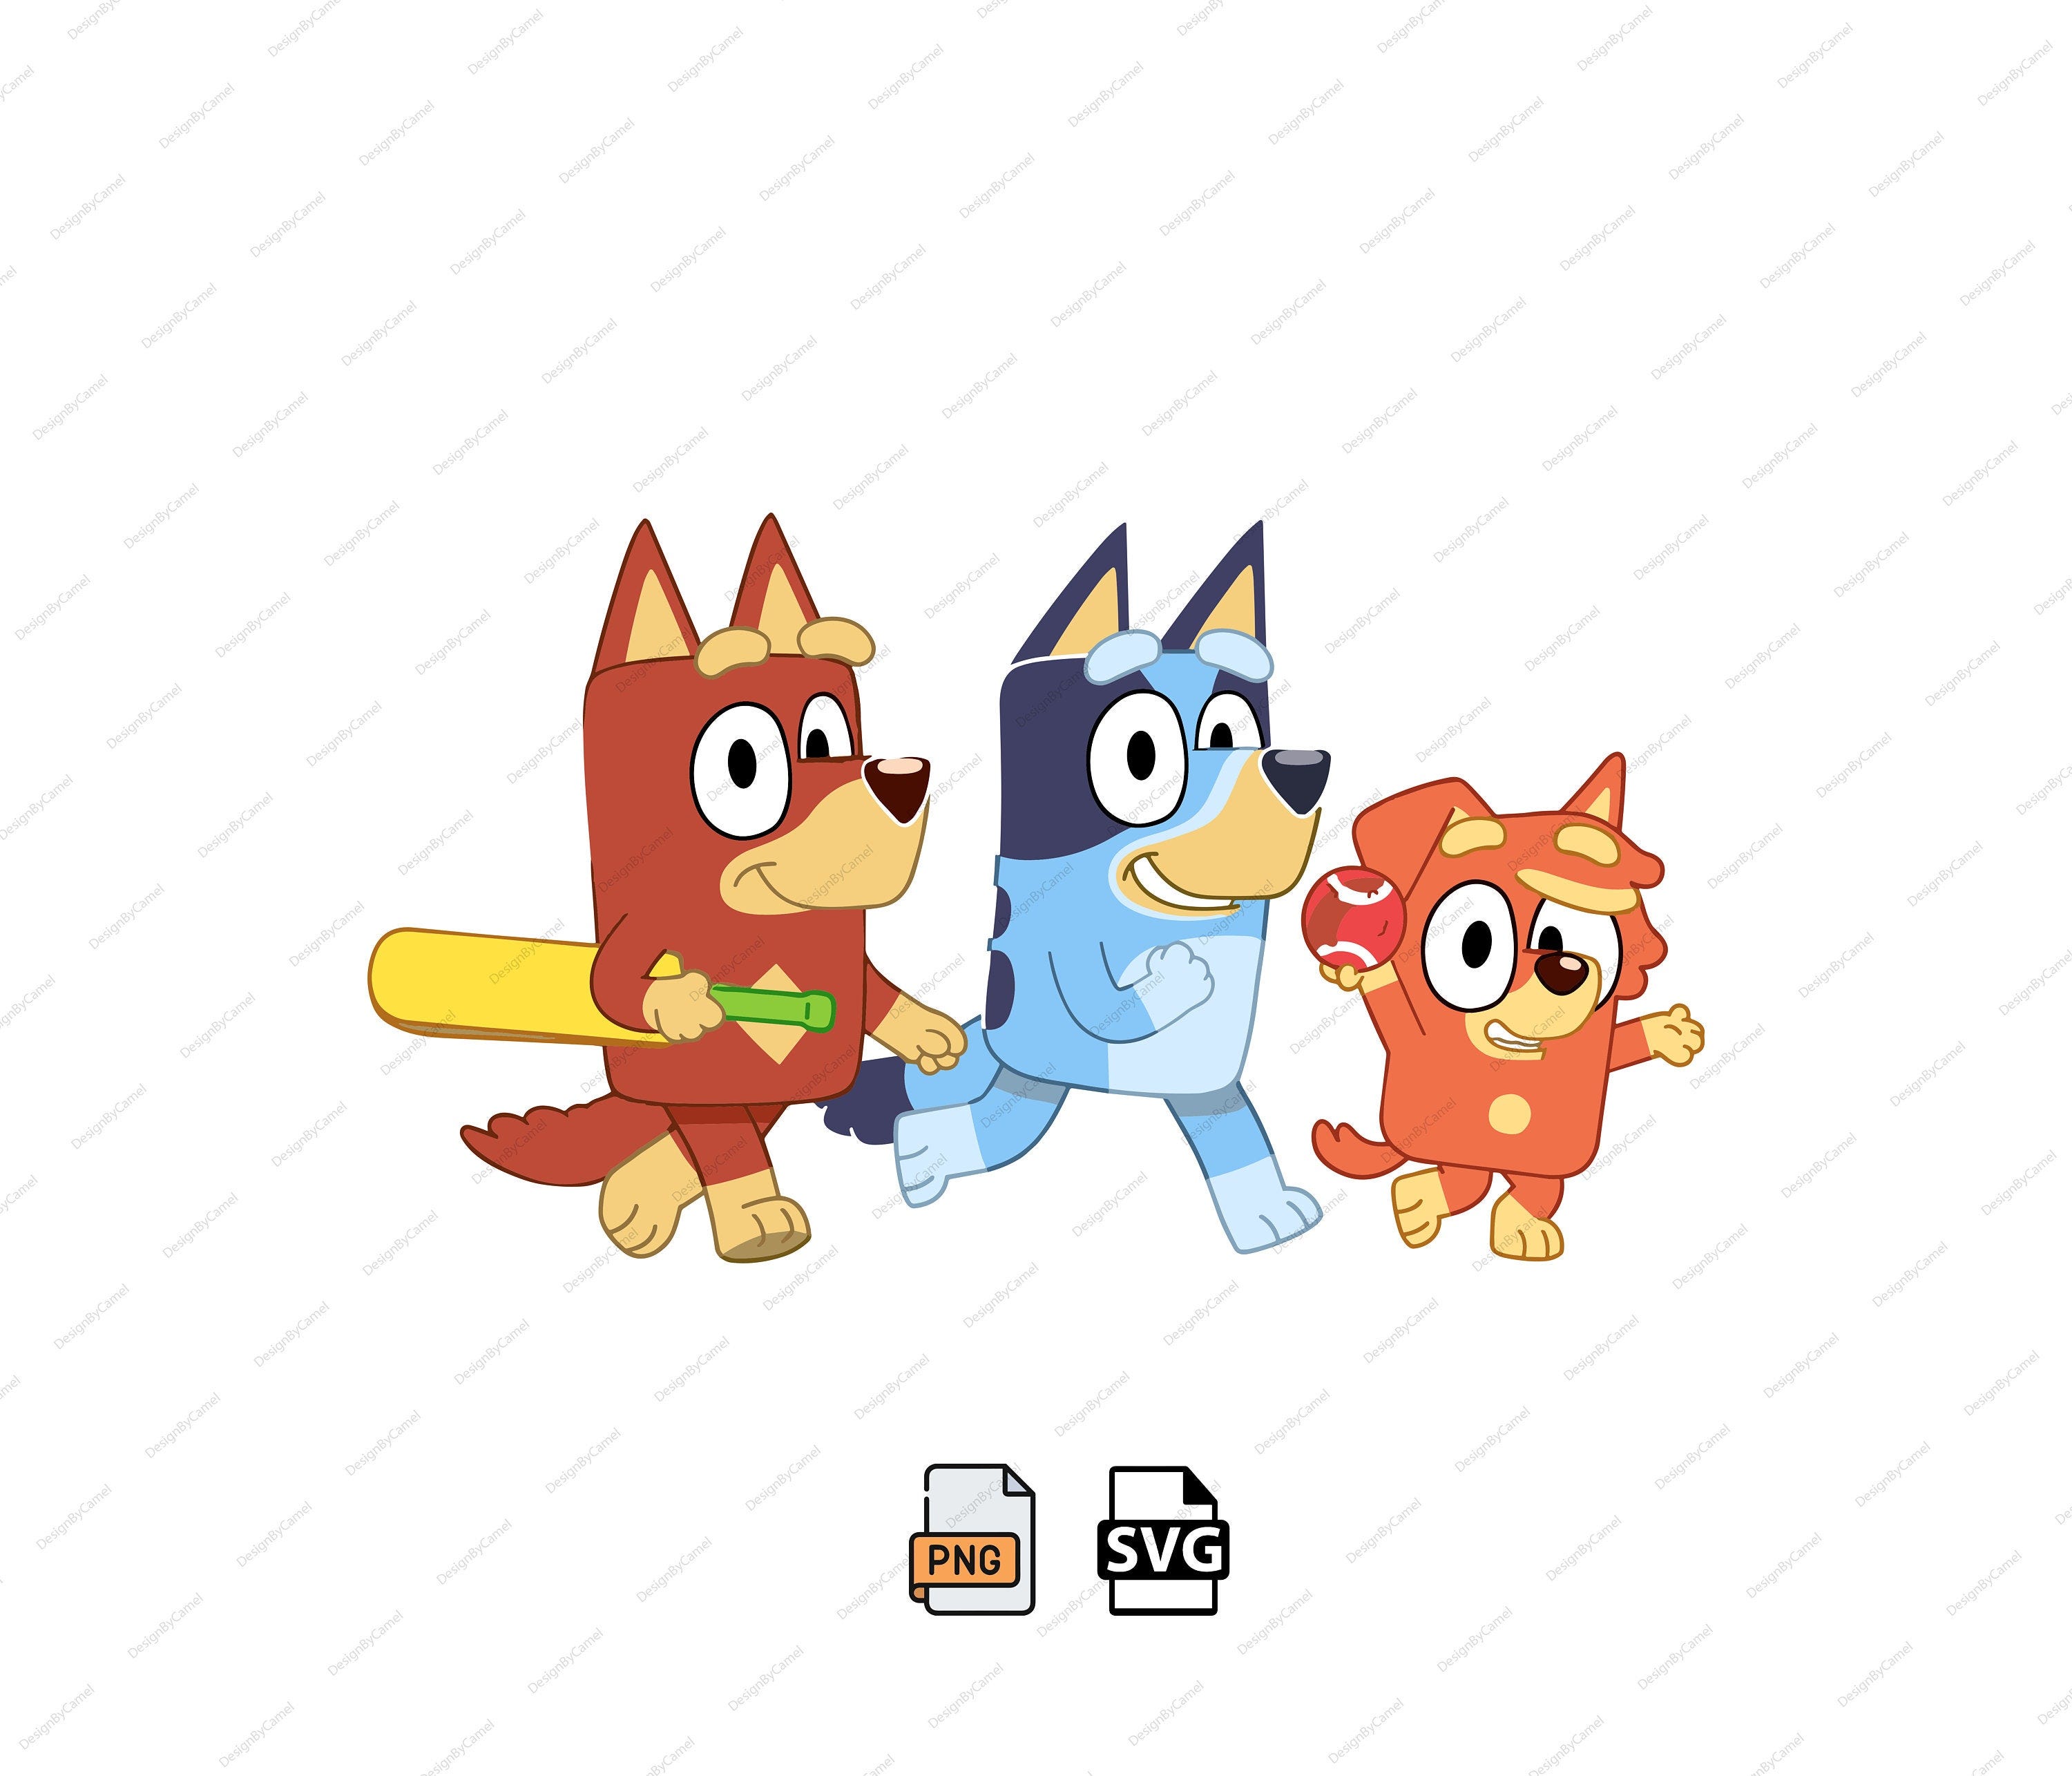 Bluey Family Png, Bluey Friends Png, Bluey Png, Bluey Ball Png, Bingo Png, Bluey Family Png, Bluey and friends Png, Digital Download